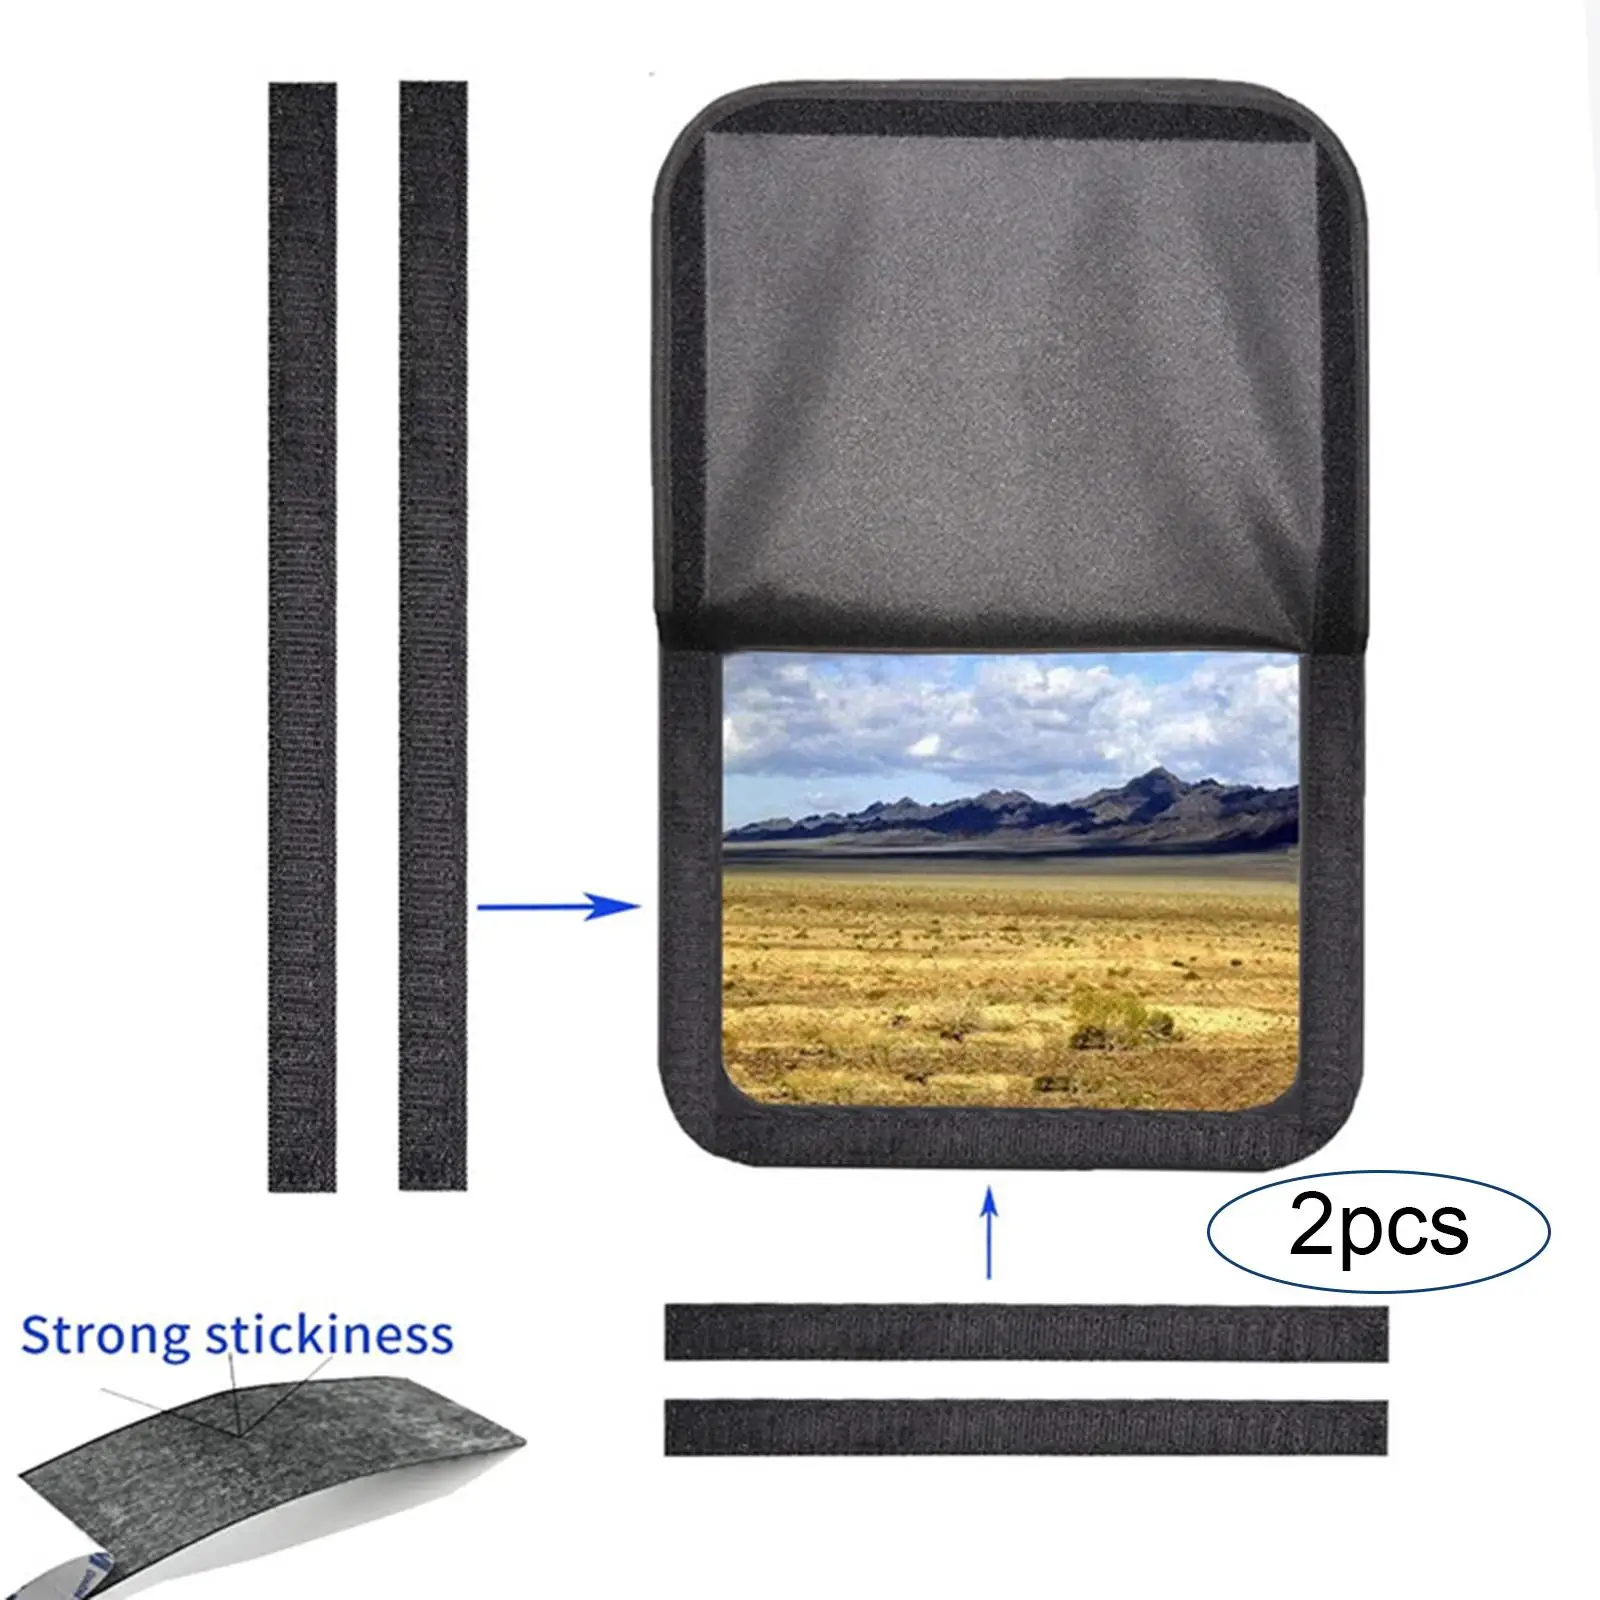 RV Door Window Fabric, Protective Travel Trailer Motorhome Fabric Accessories Windshield Privacy Screen  for Campers Rvs